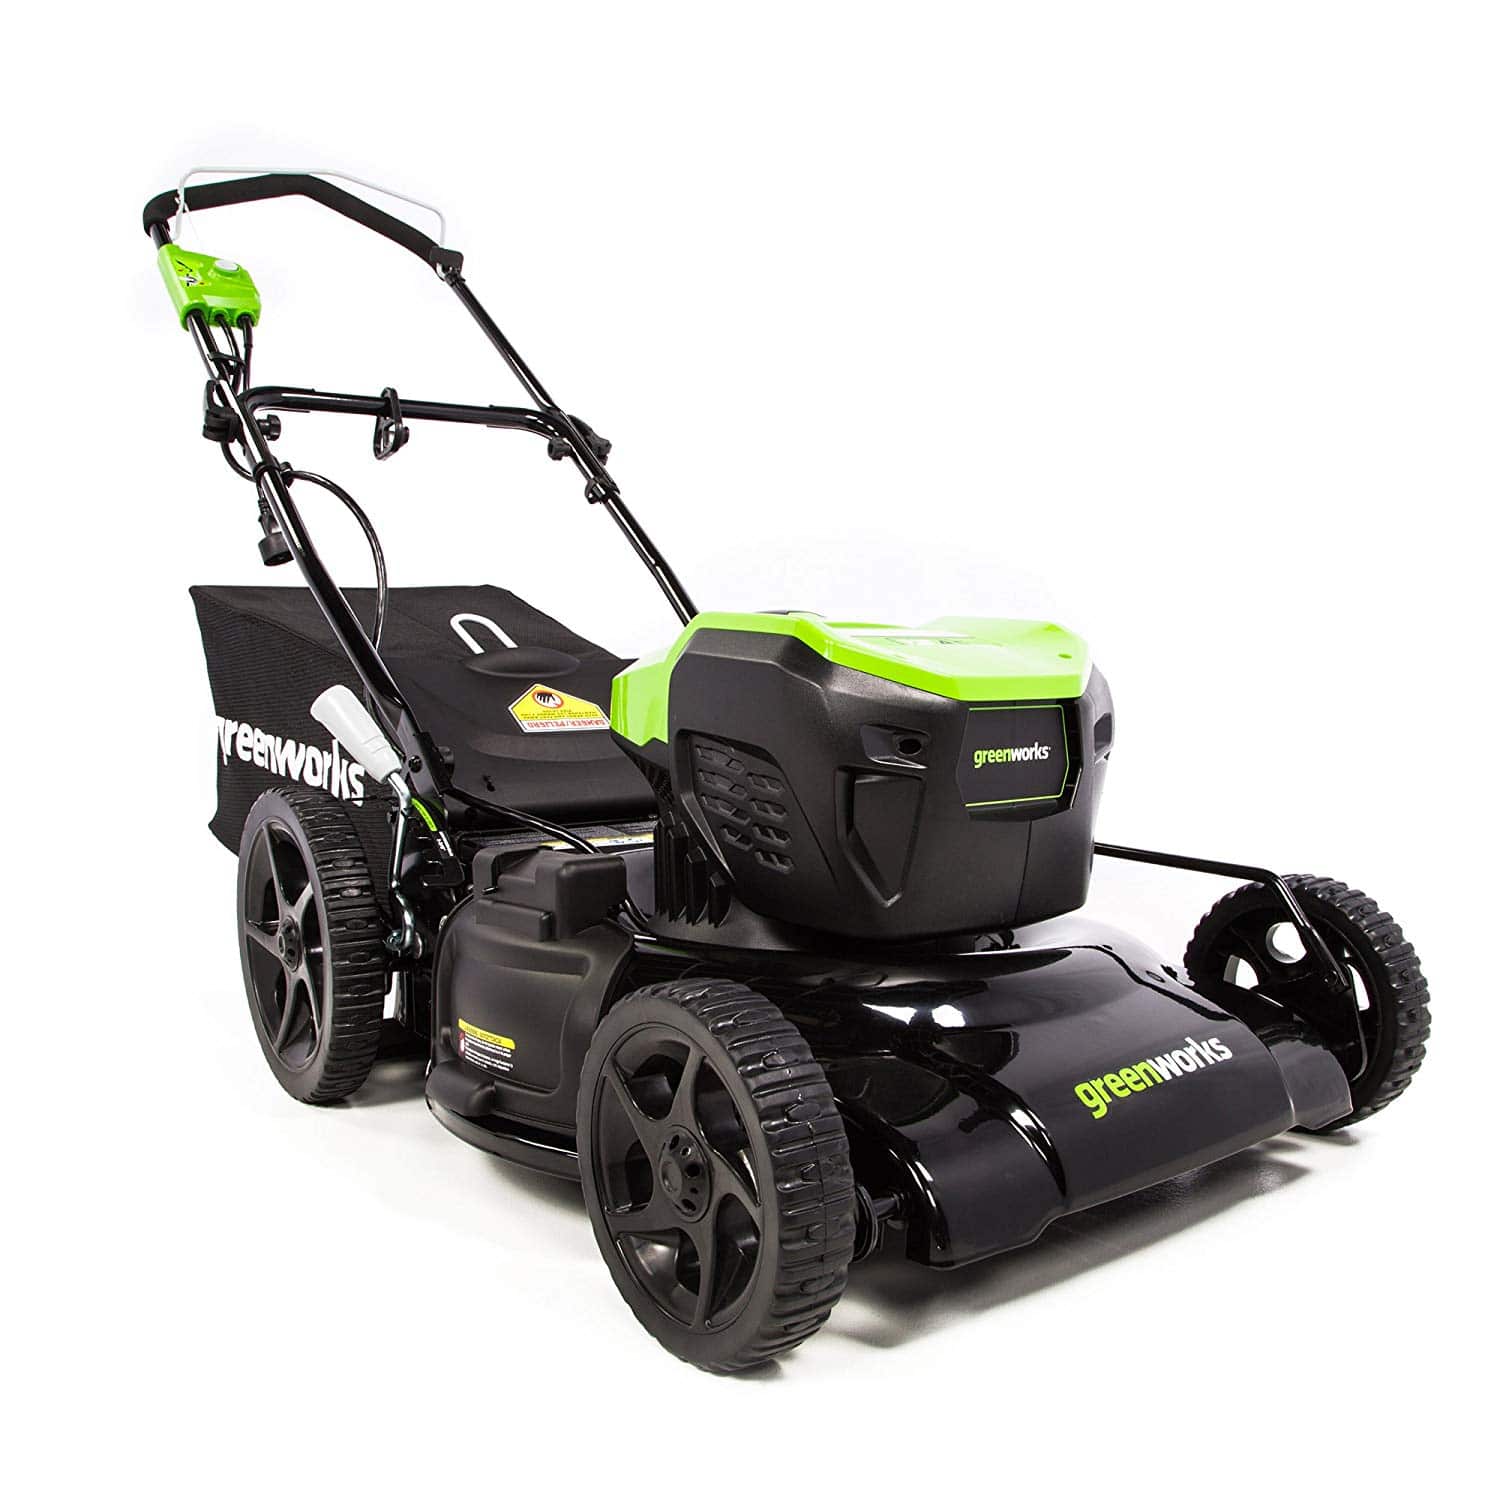 Greenworks 21-Inch 13 Amp Corded Lawn Mower